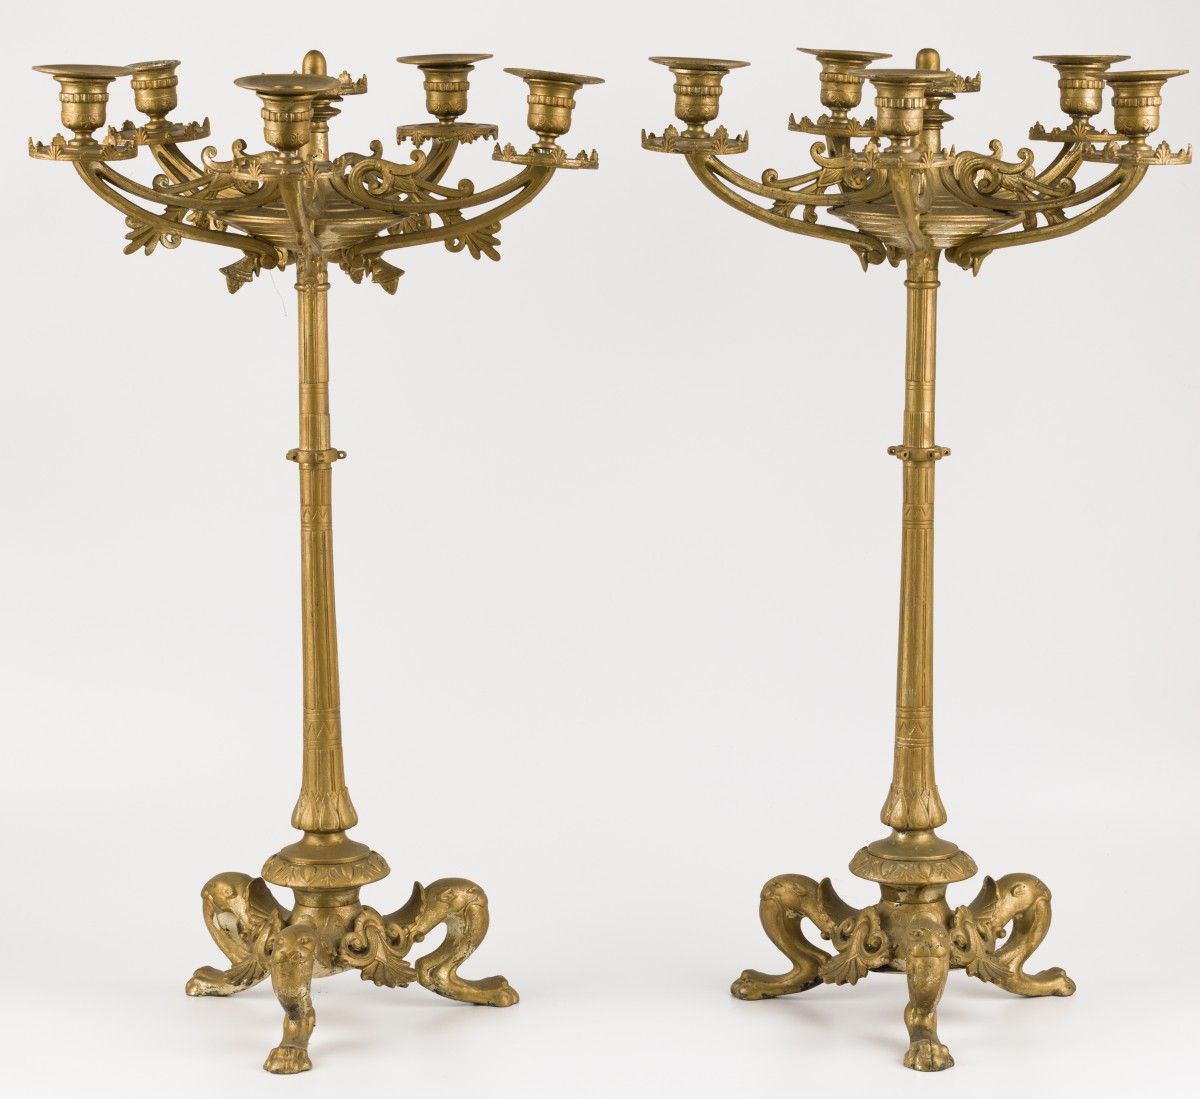 A set of (2) gold painted ZAMAC candelabra, France, ca. 1900. A cinque luci, con&hellip;